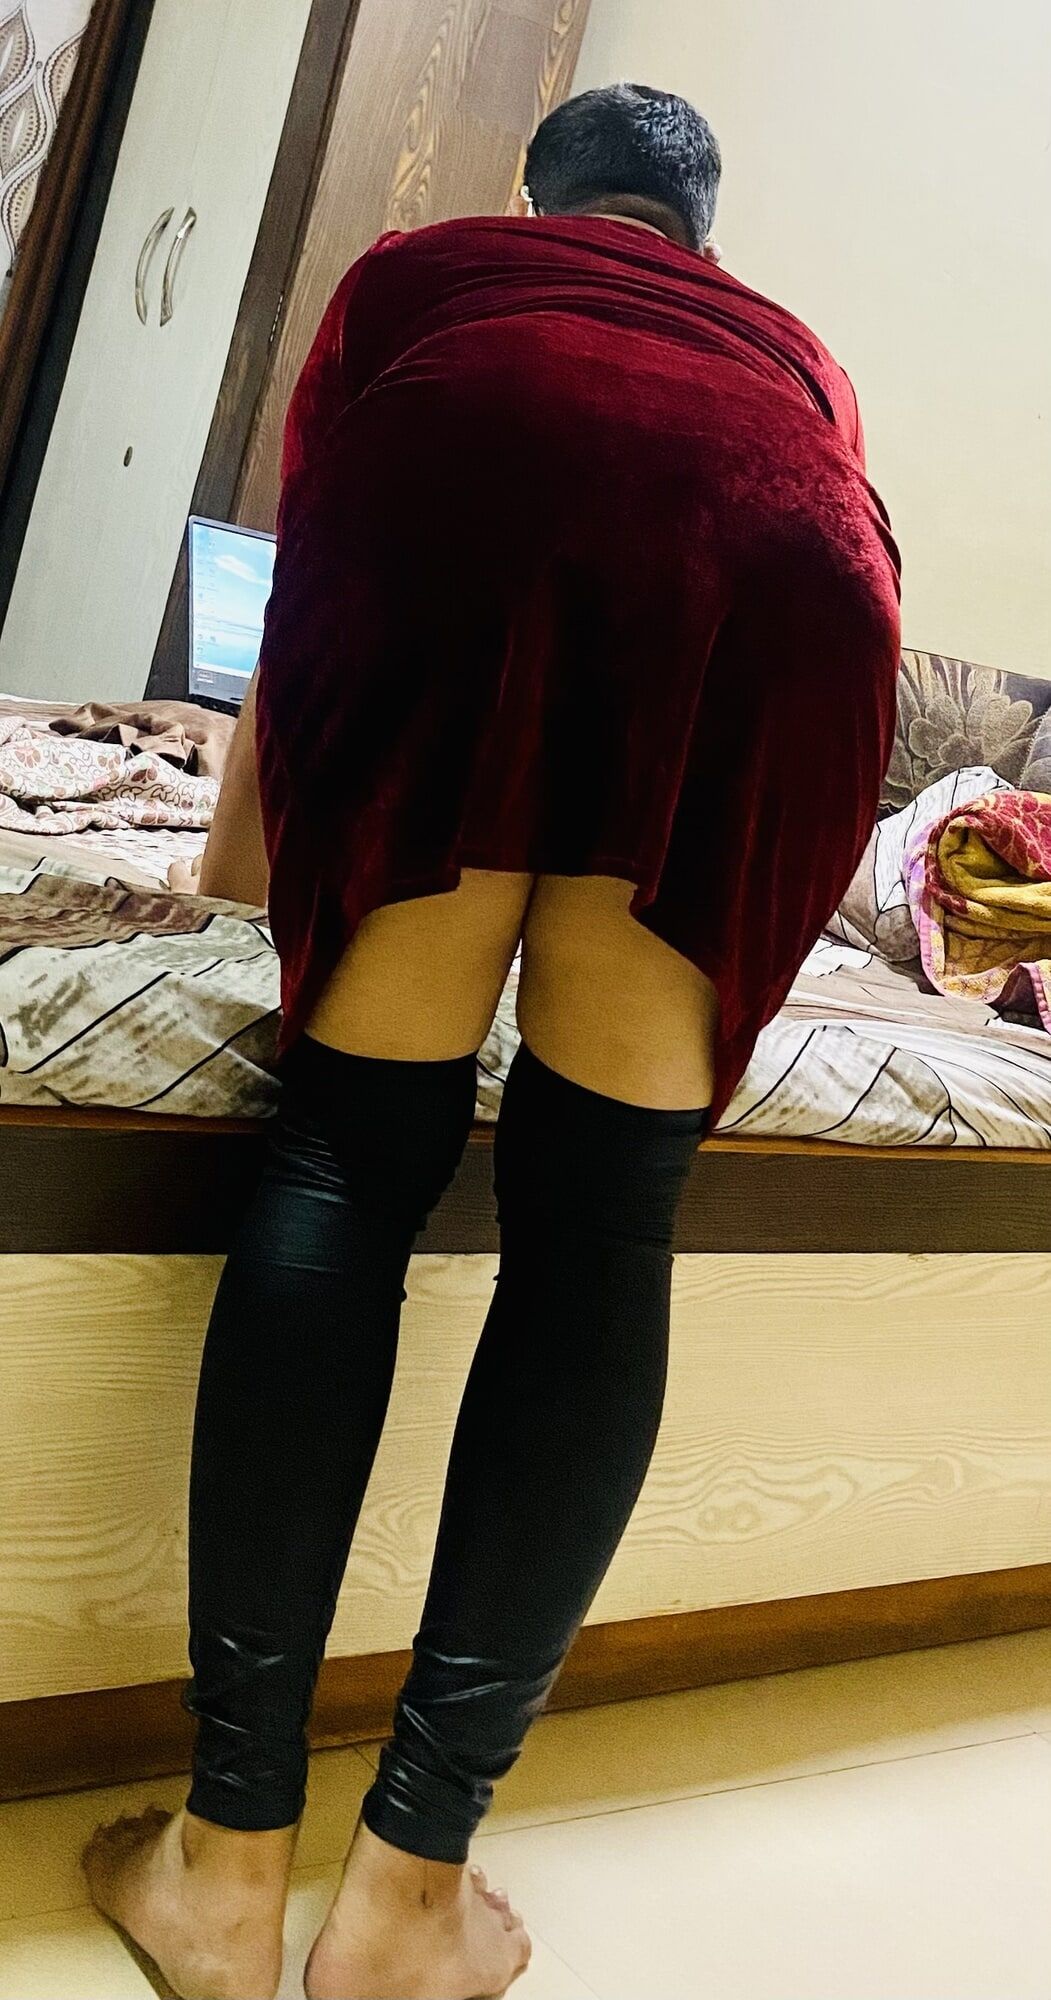 New red dress and panty #45